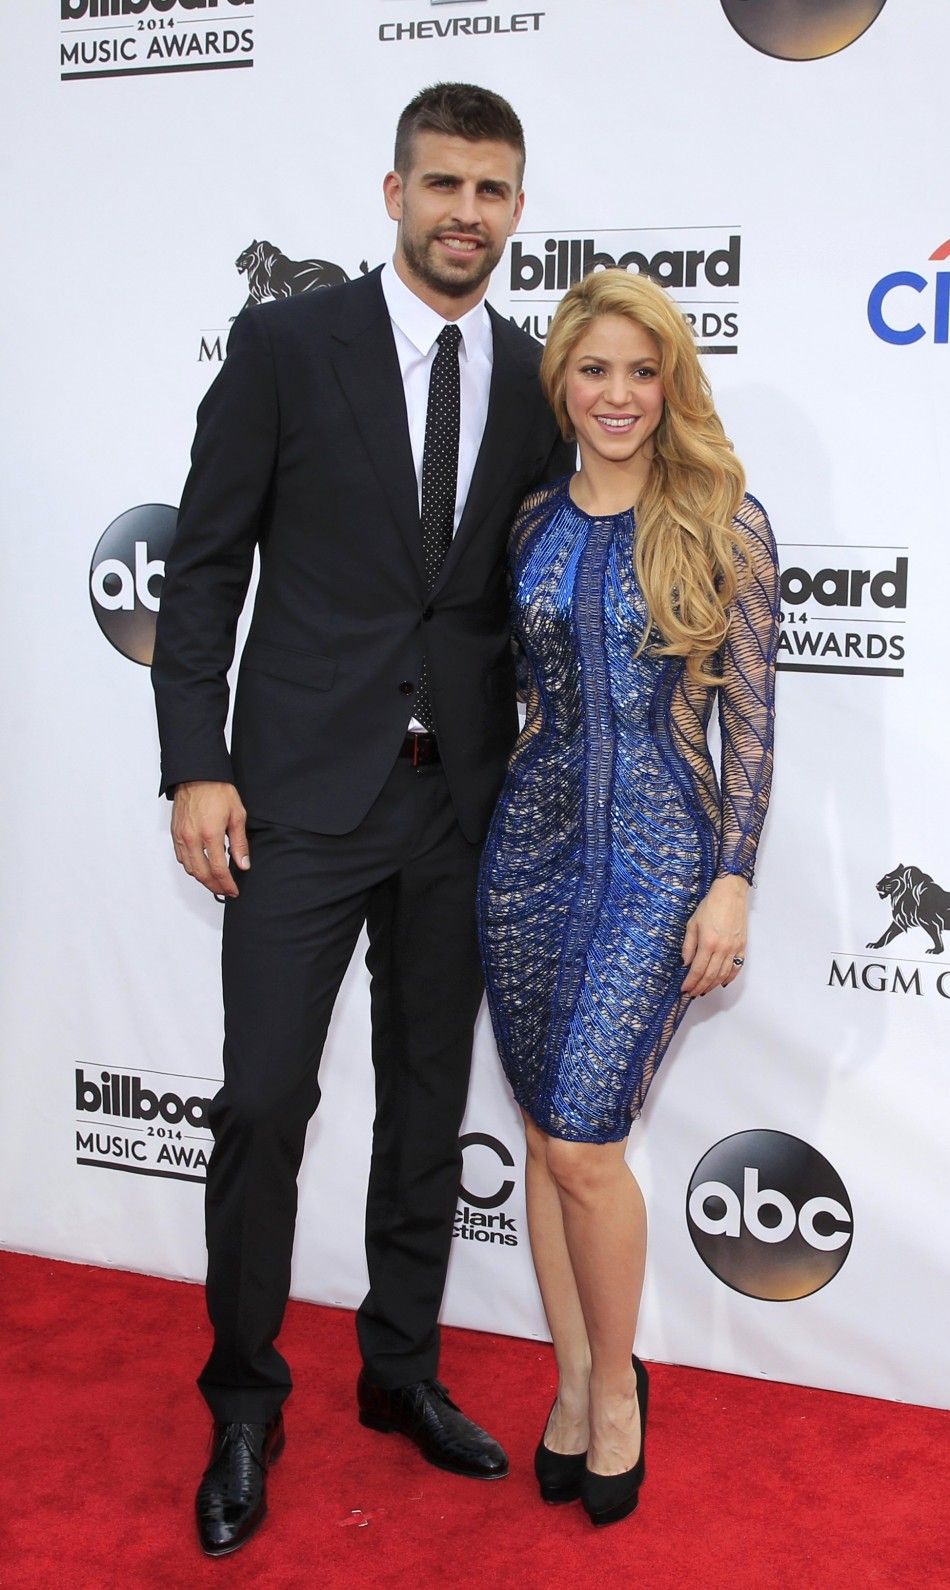 Singer-songwriter Shakira and professional soccer player Gerard Pique arrive at the 2014 Billboard Music Awards in Las Vegas, Nevada May 18, 2014.   REUTERSL.E. Baskow